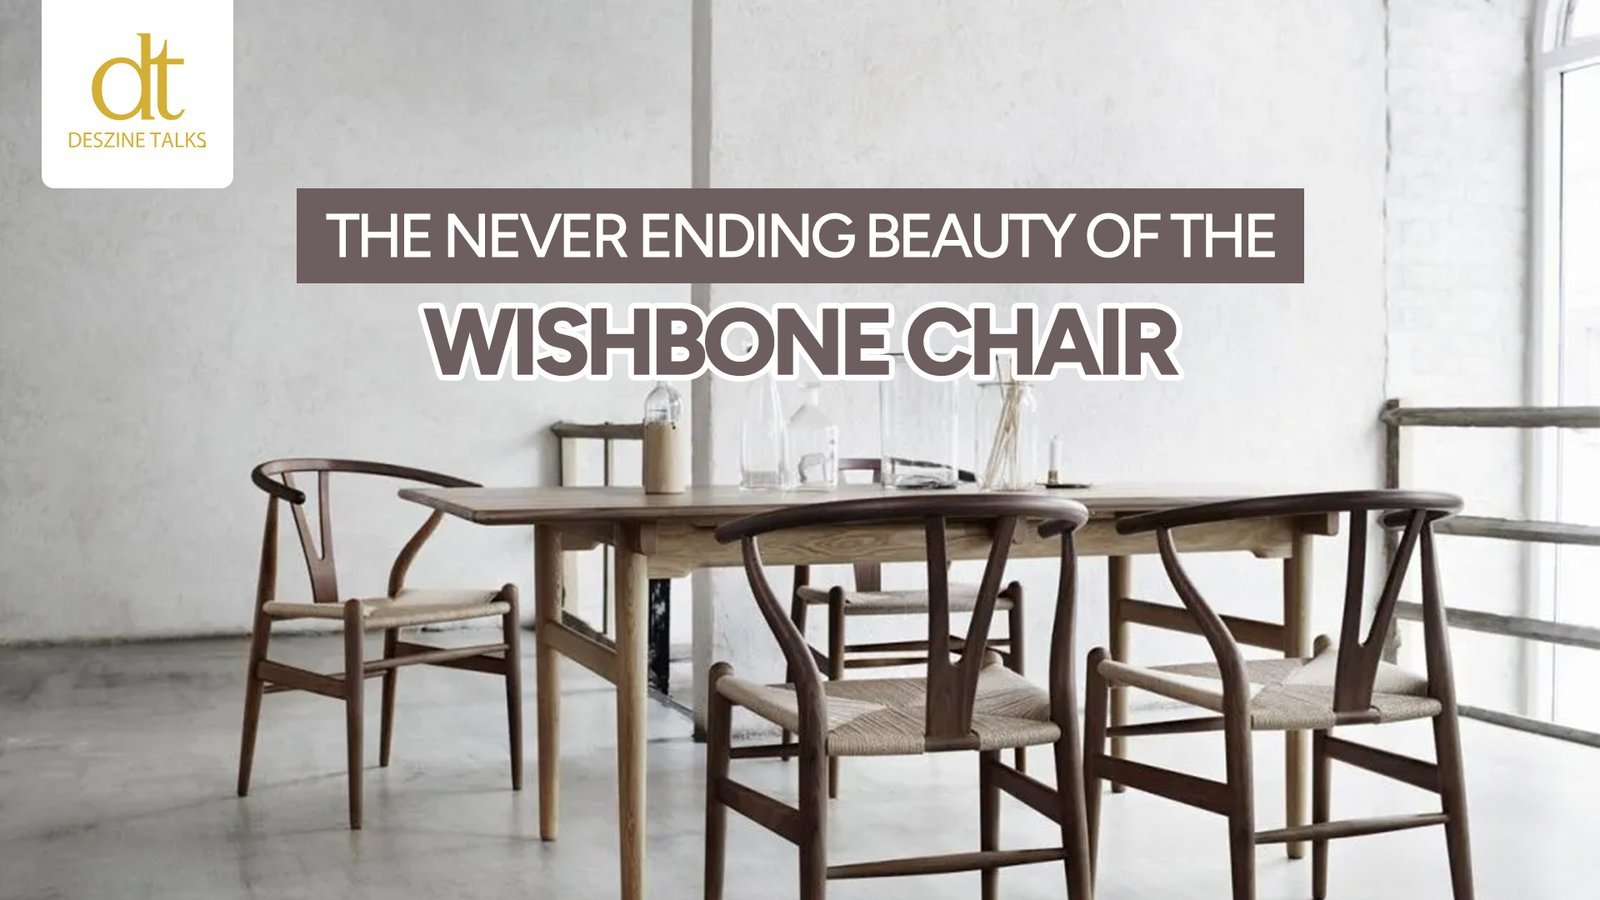 The never ending beauty of the Wishbone Chair - Fashion Trends